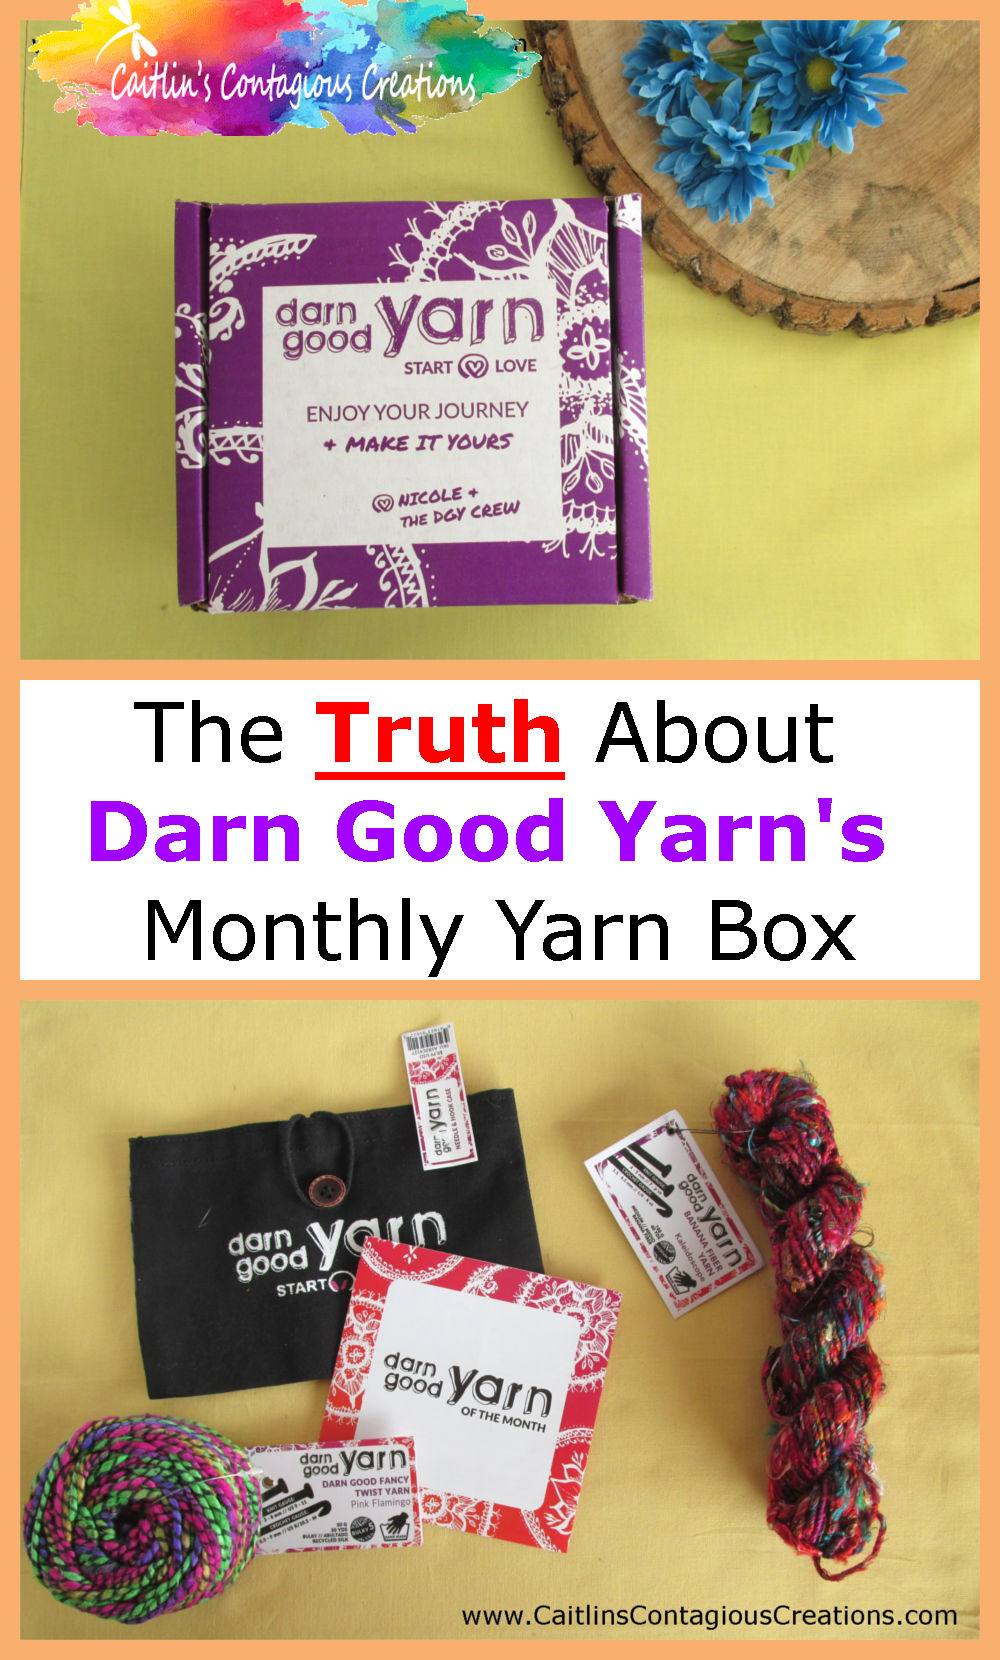 The truth about Darn Good Yarn Box from Caitlin's Contagious Creations. A yarn box review with all the details you need to know before trying this crochet and knitting yarn month club. #DarnGoodYarnBoxReview